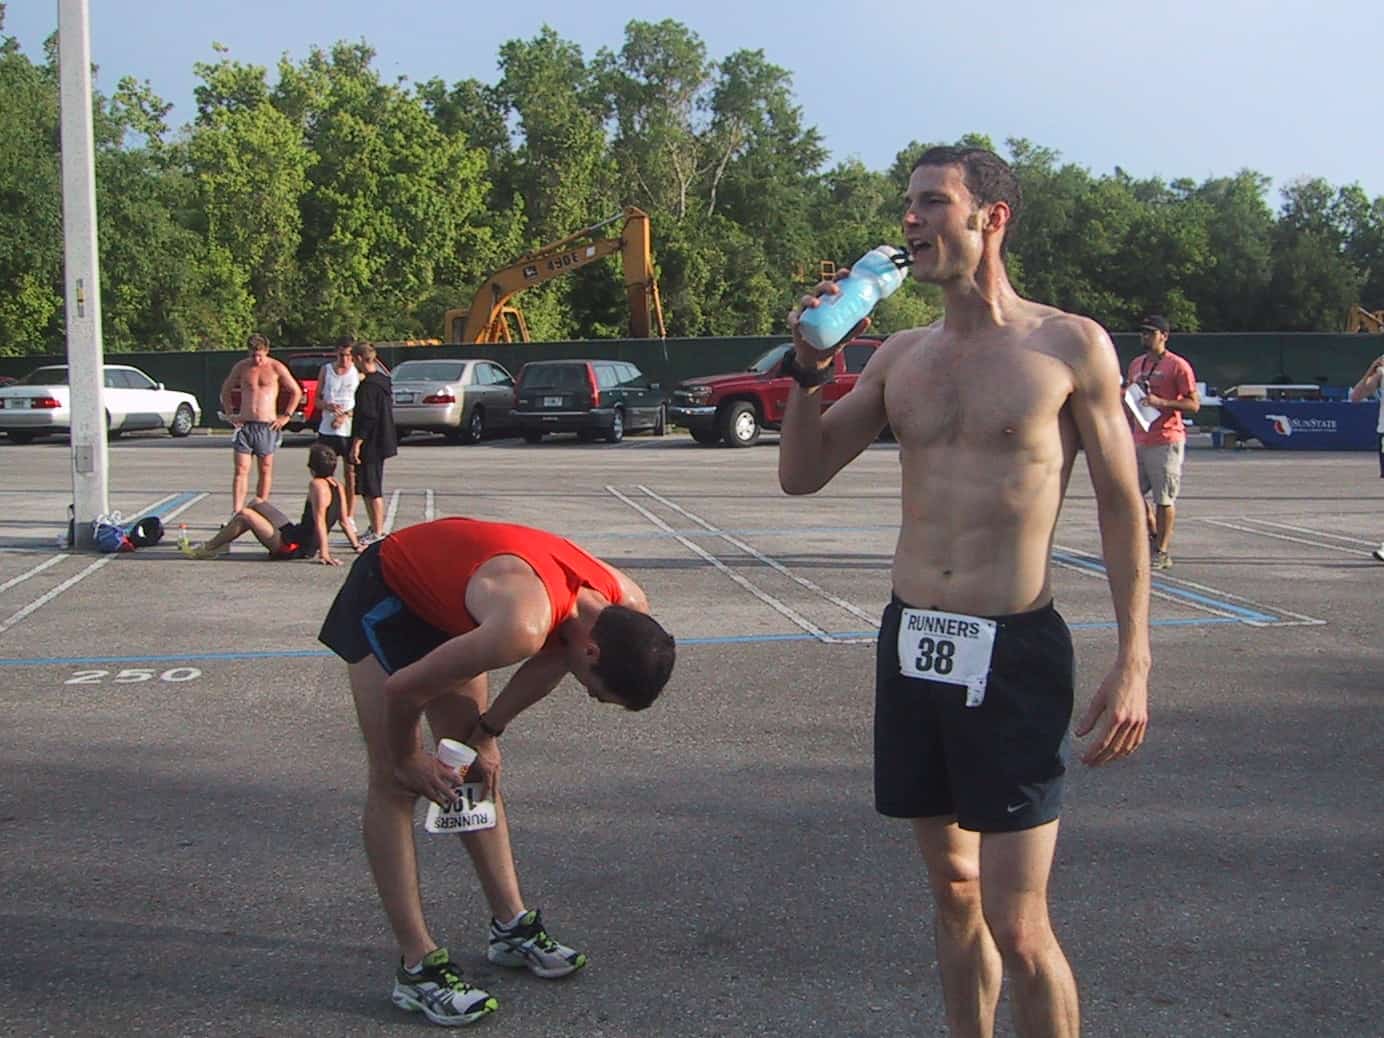 Runners after a race